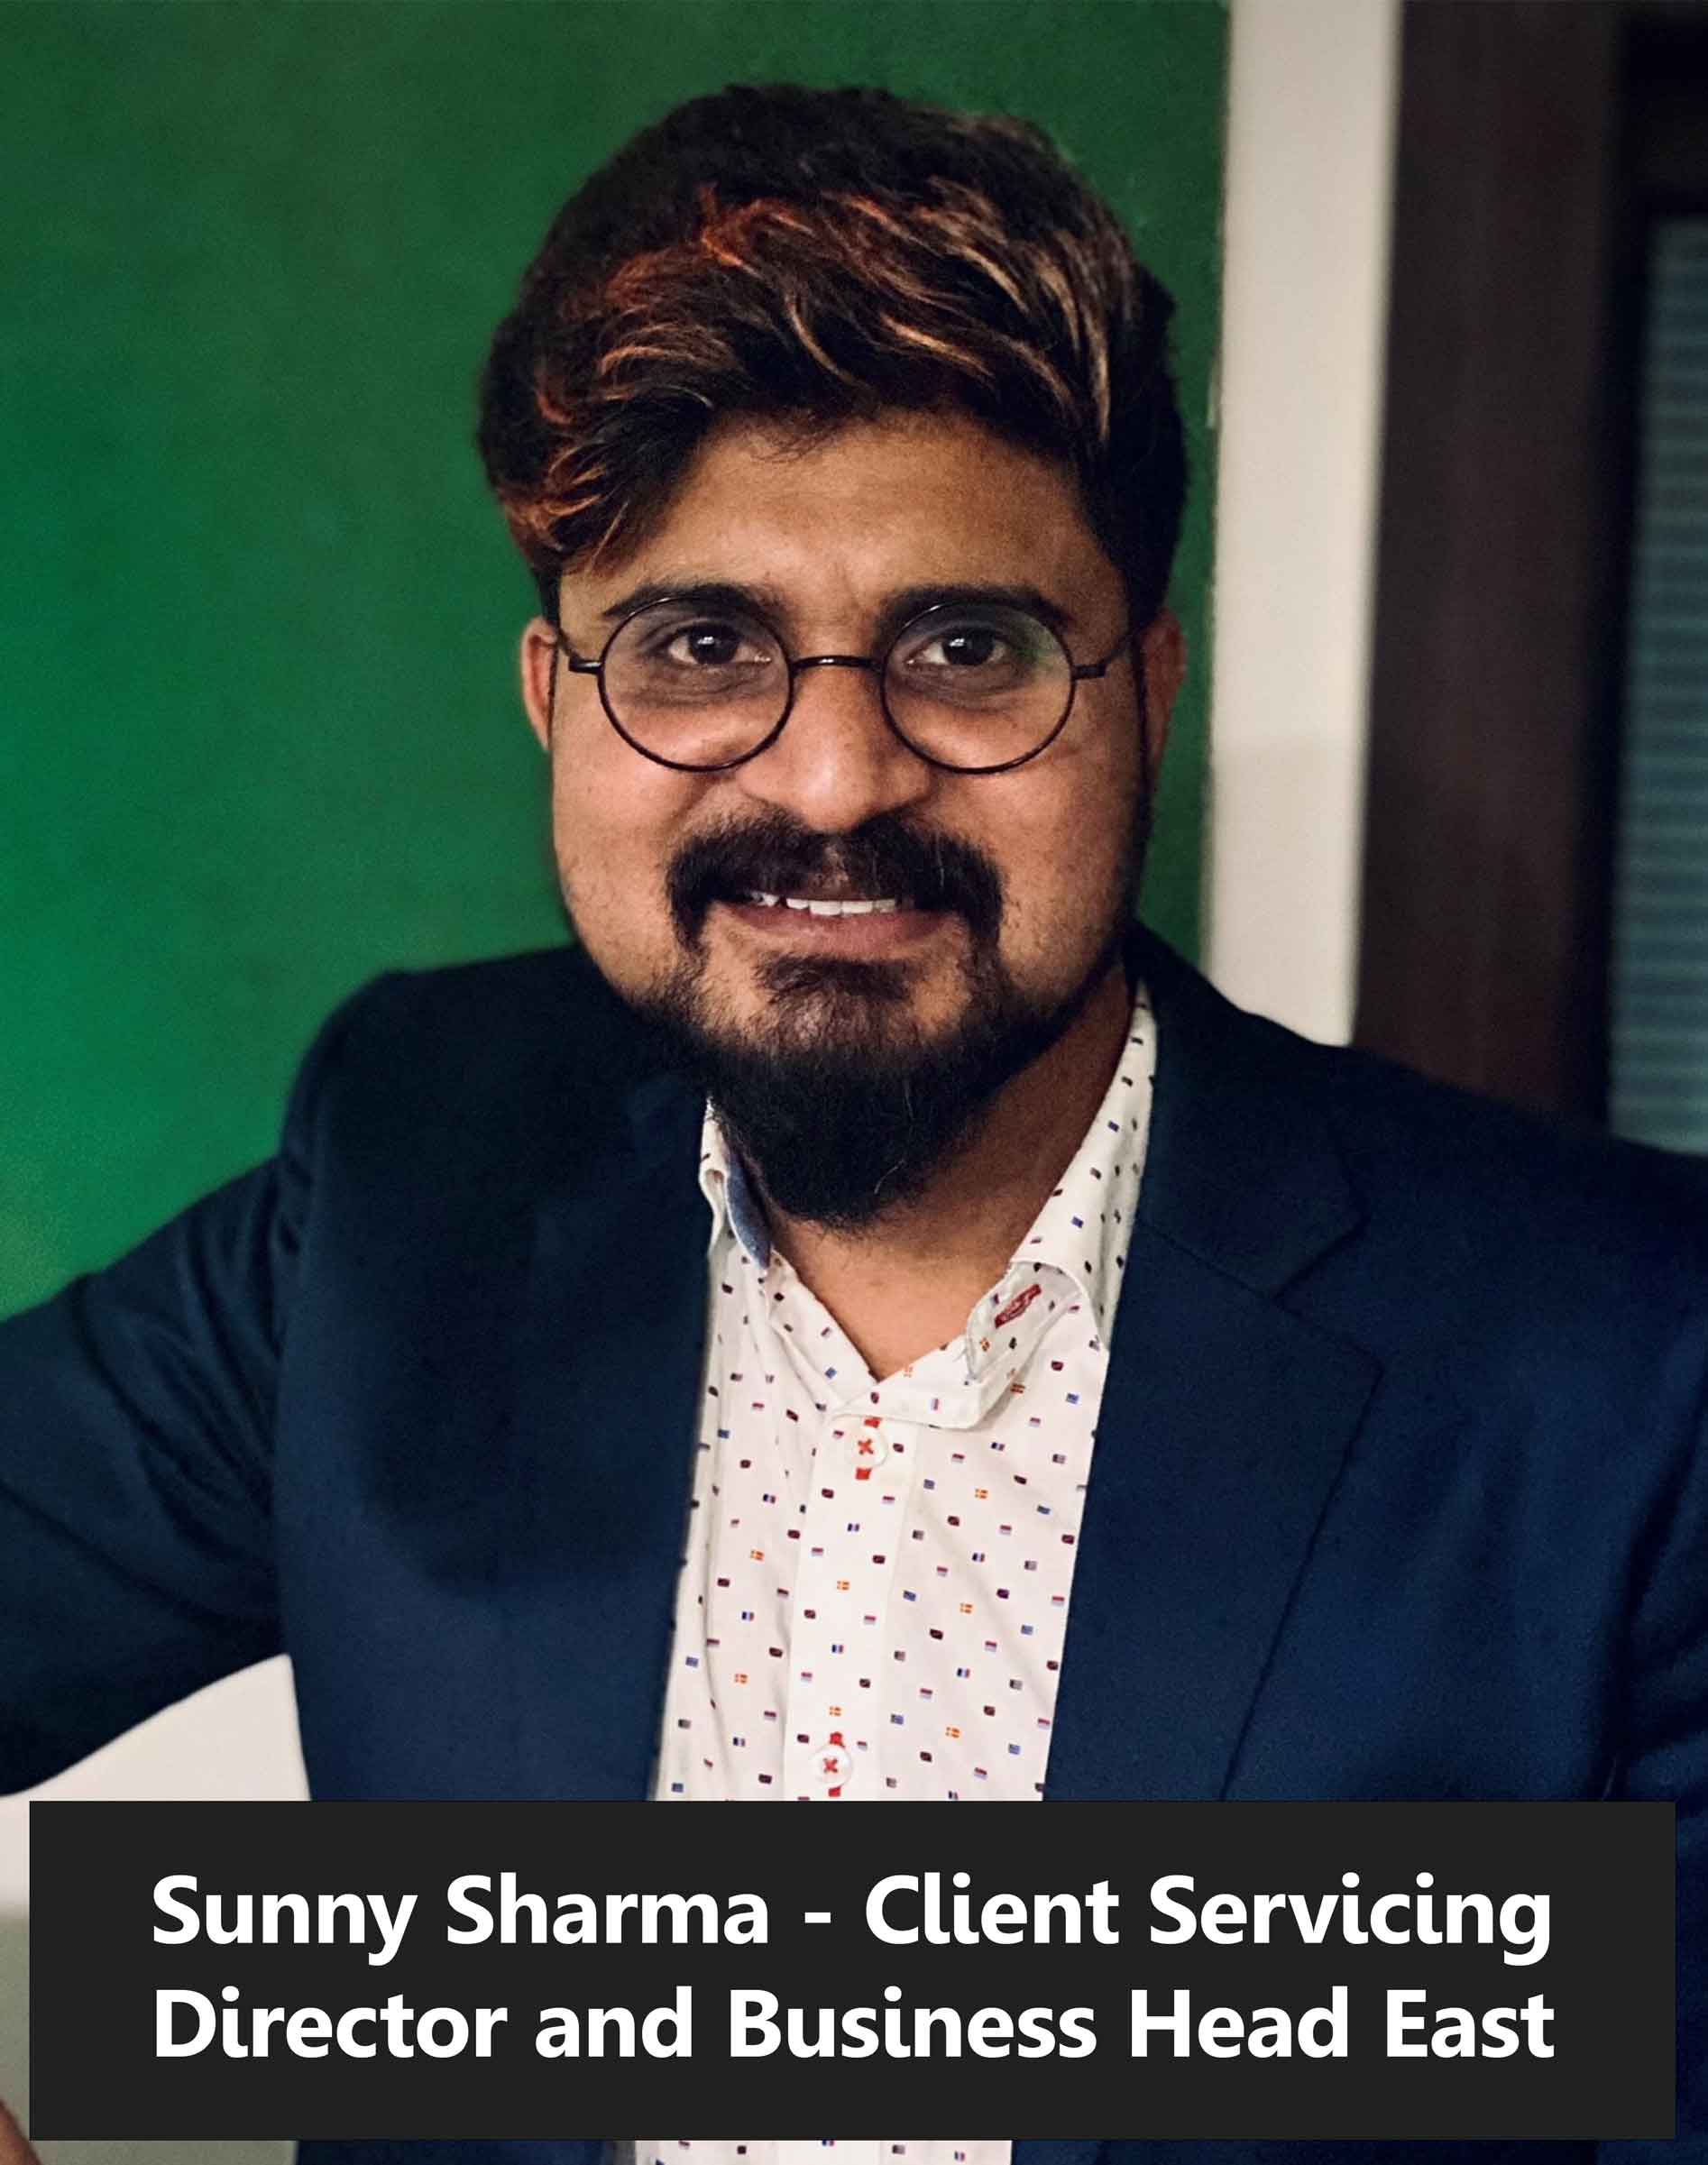 Sunny Sharma, Client Servicing Director and Business Head East